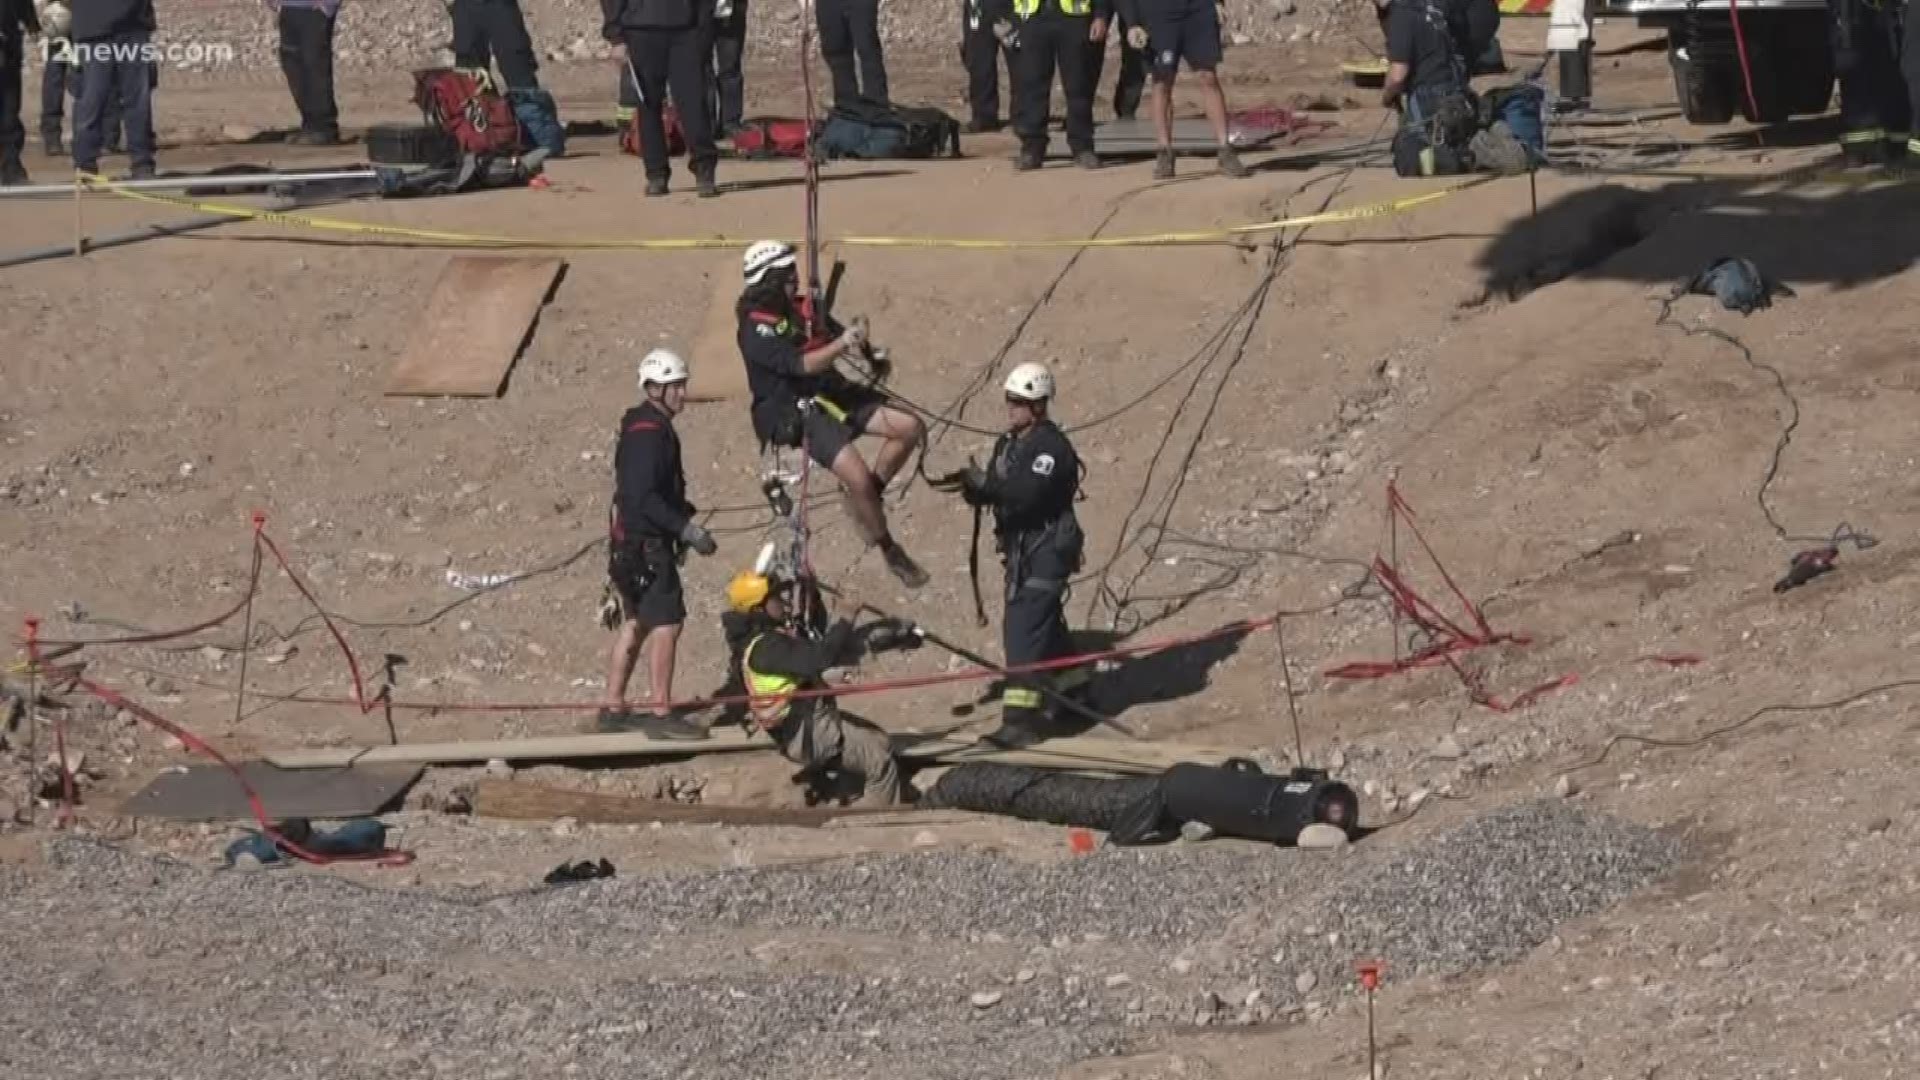 Rural Metro Fire rescued a man who fell into a 50 foot dry well on a construction site near San Tan Valley on Tuesday morning. The man has only minor injuries.